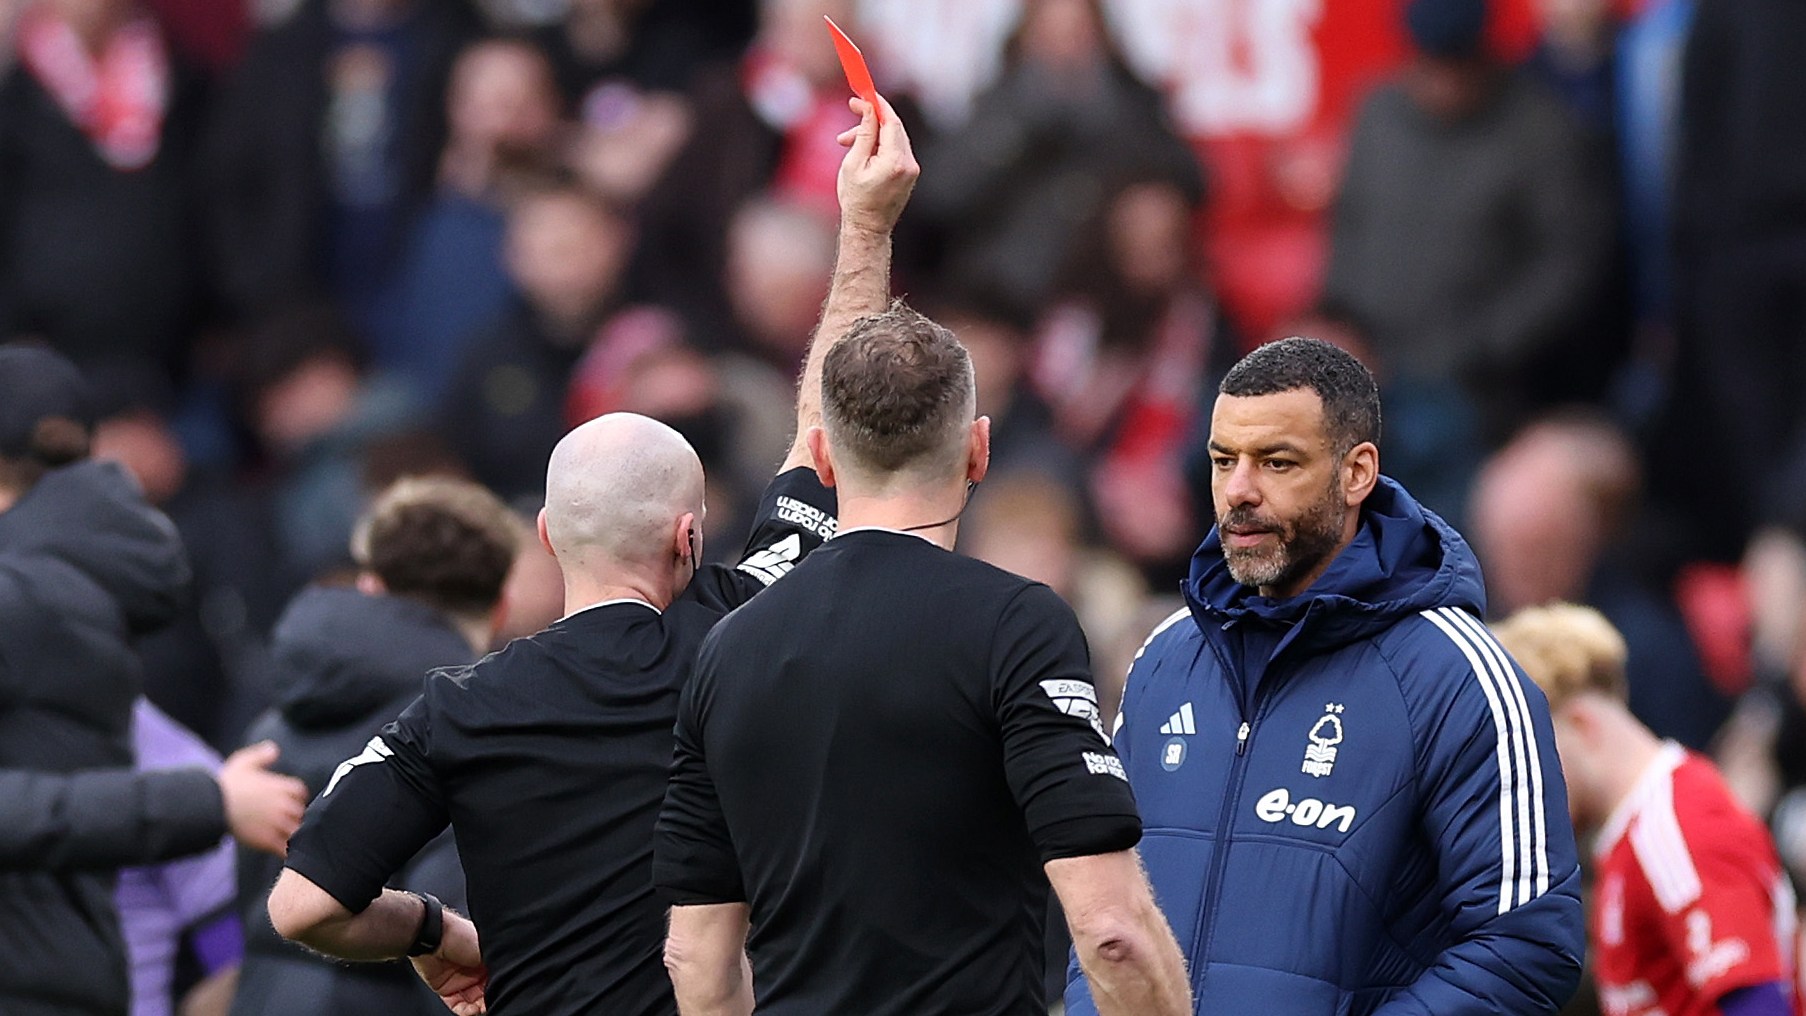 ‘It’s the same every week, you c**t’ – Forest coach’s rant at referee